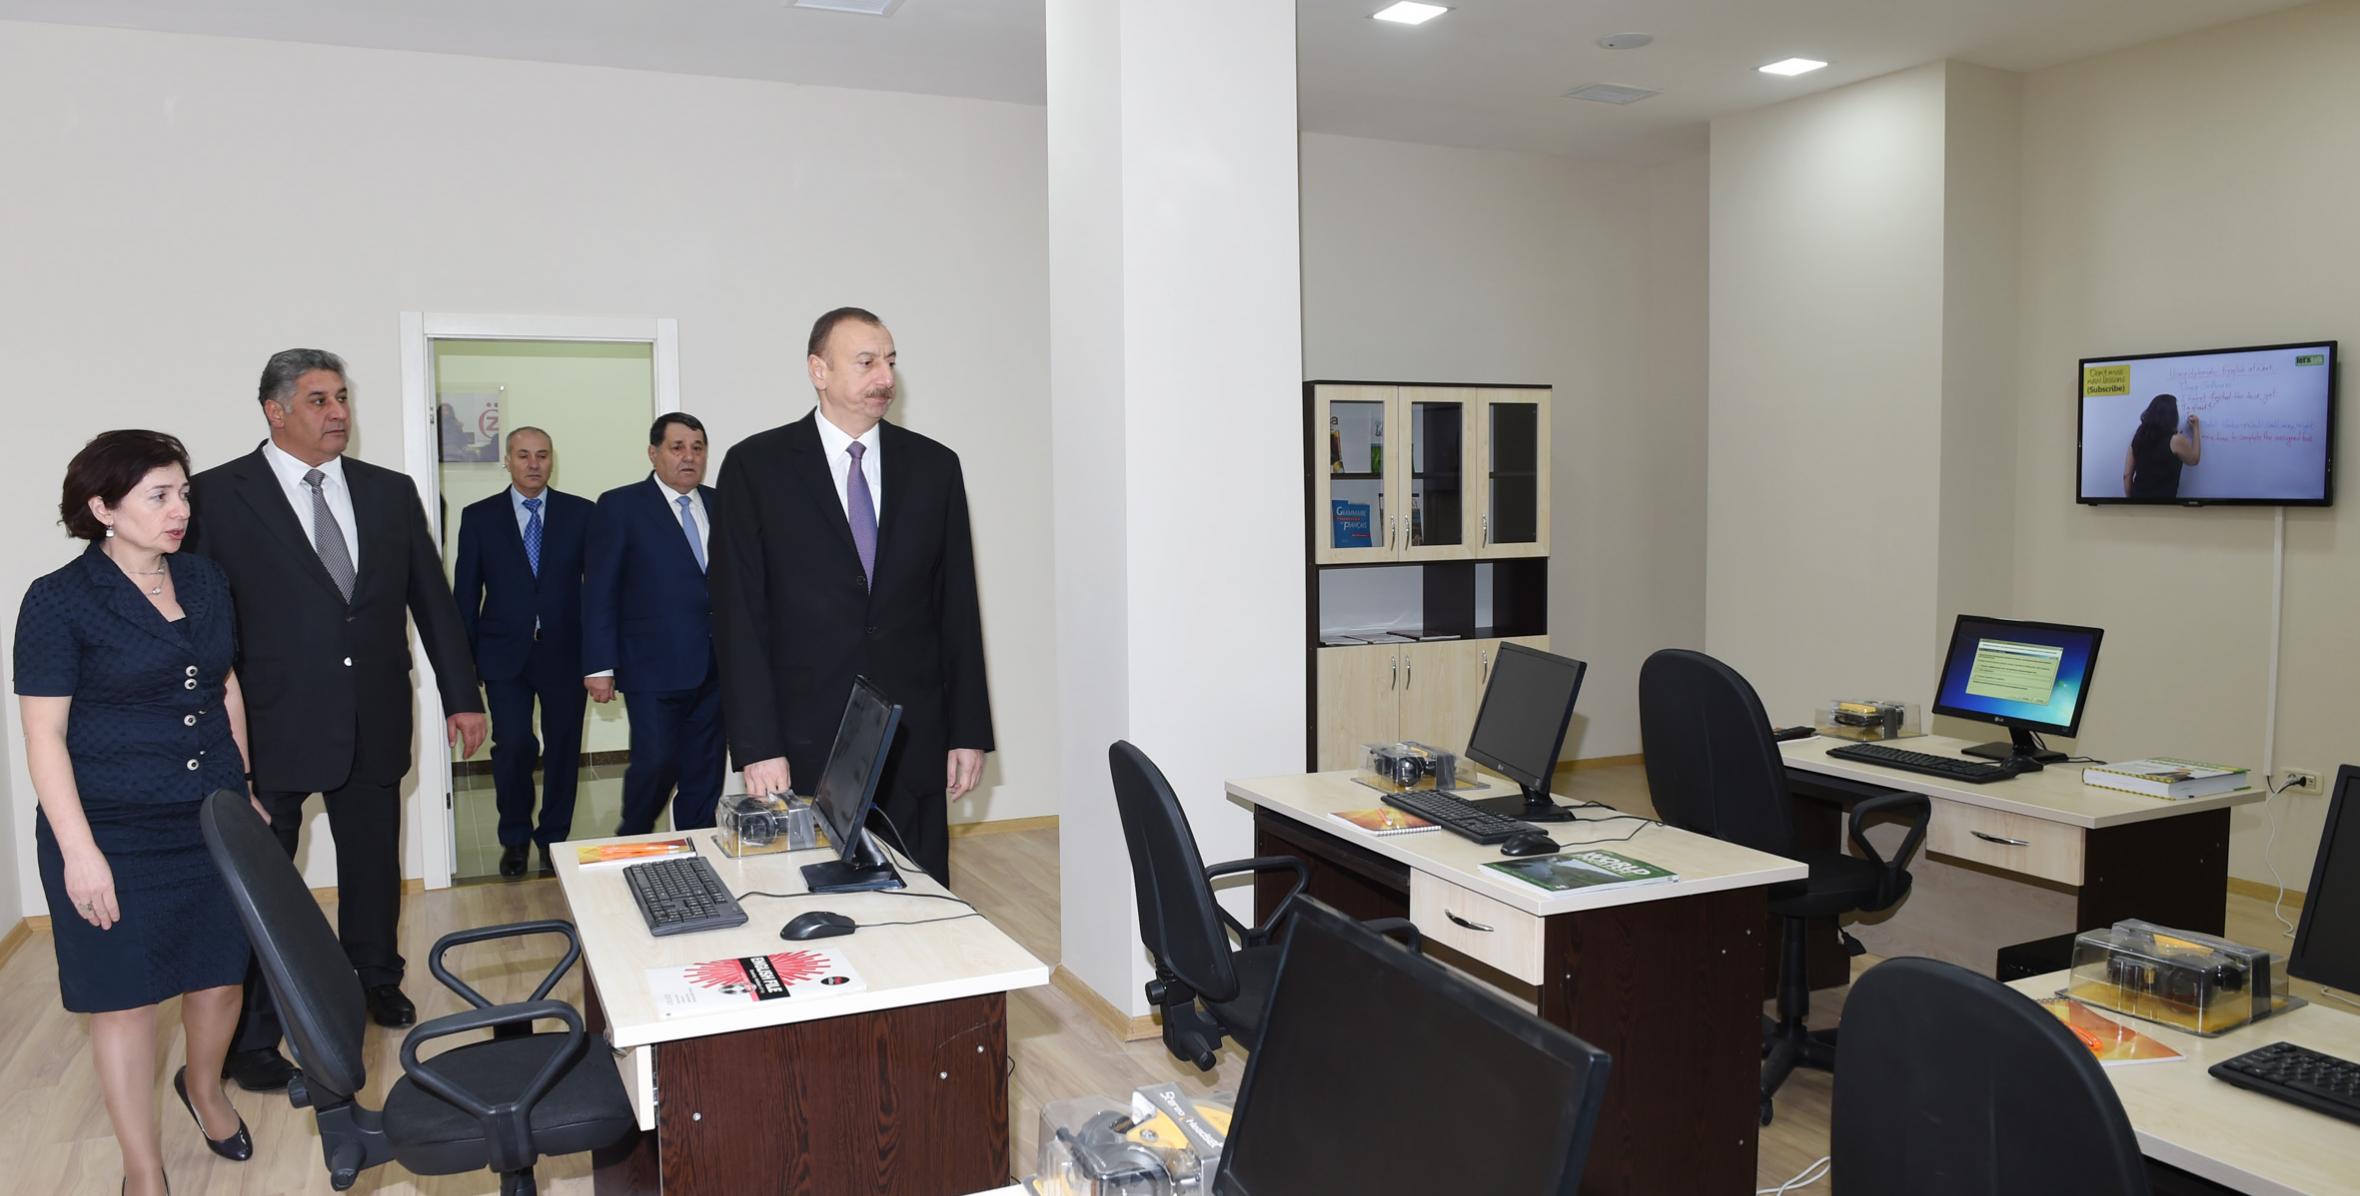 Ilham Aliyev attended the opening of Youth House in Qovlar, Tovuz